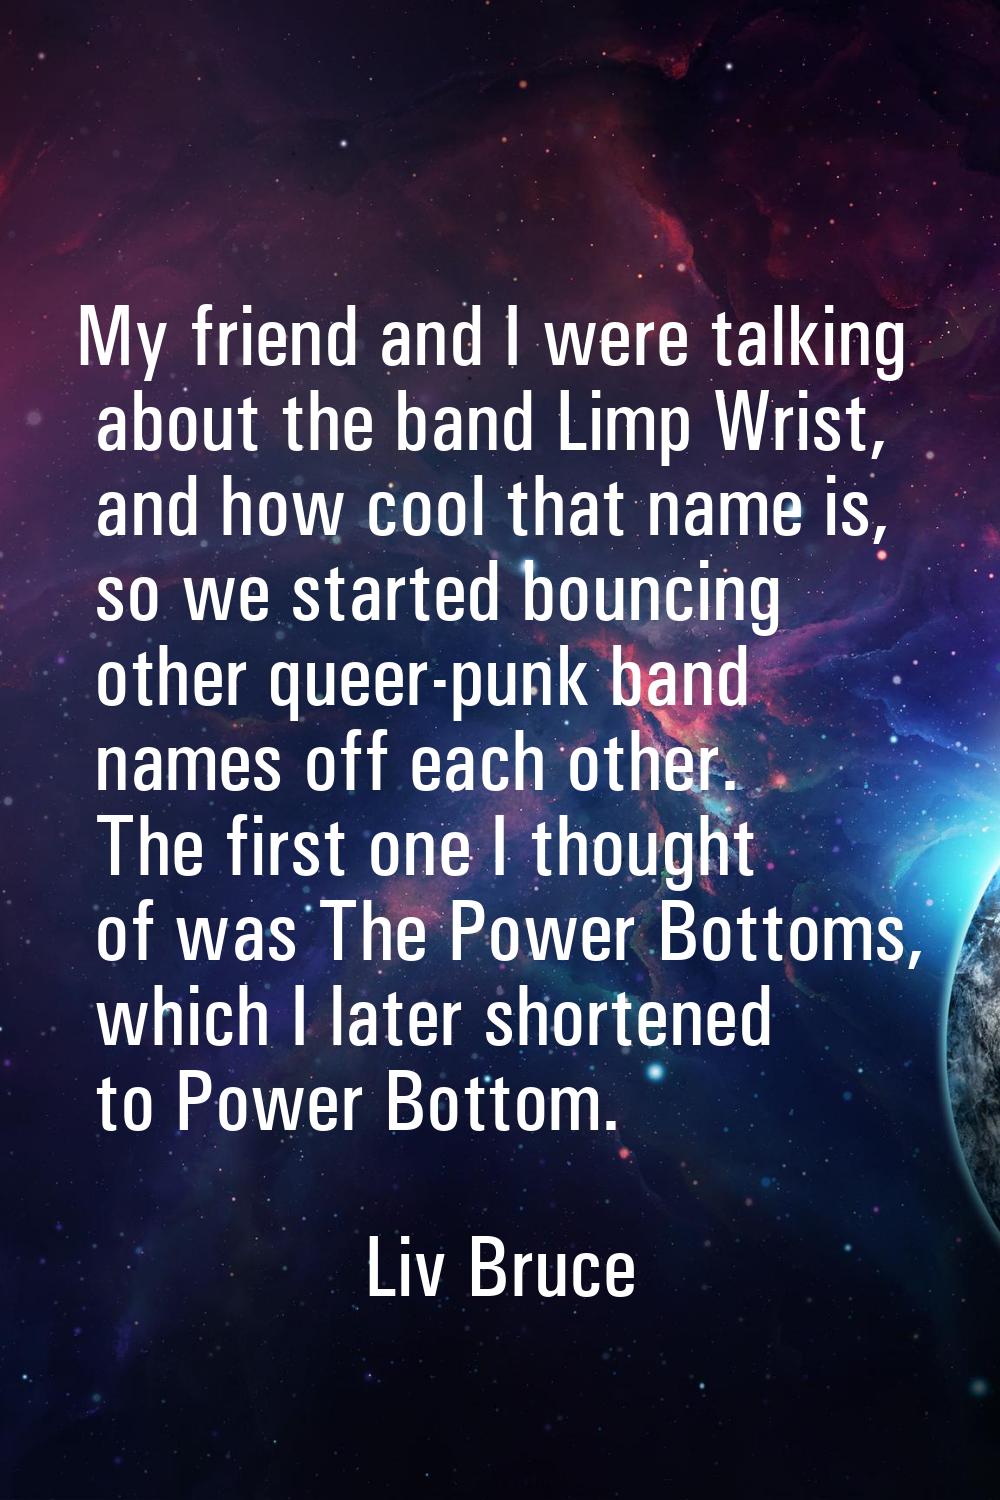 My friend and I were talking about the band Limp Wrist, and how cool that name is, so we started bo